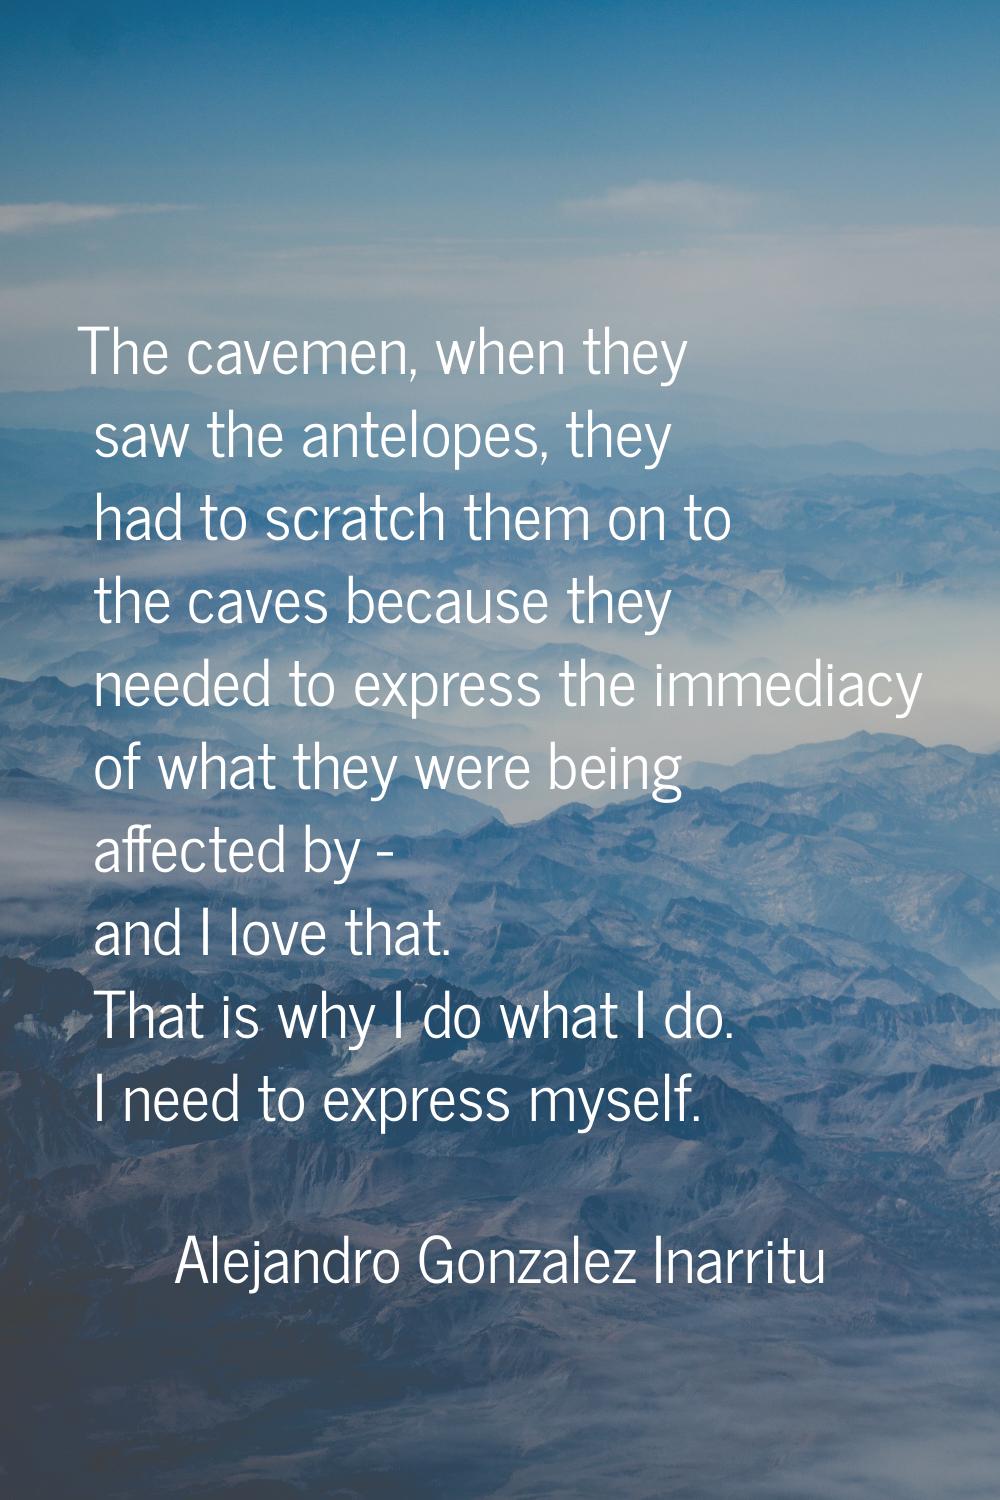 The cavemen, when they saw the antelopes, they had to scratch them on to the caves because they nee